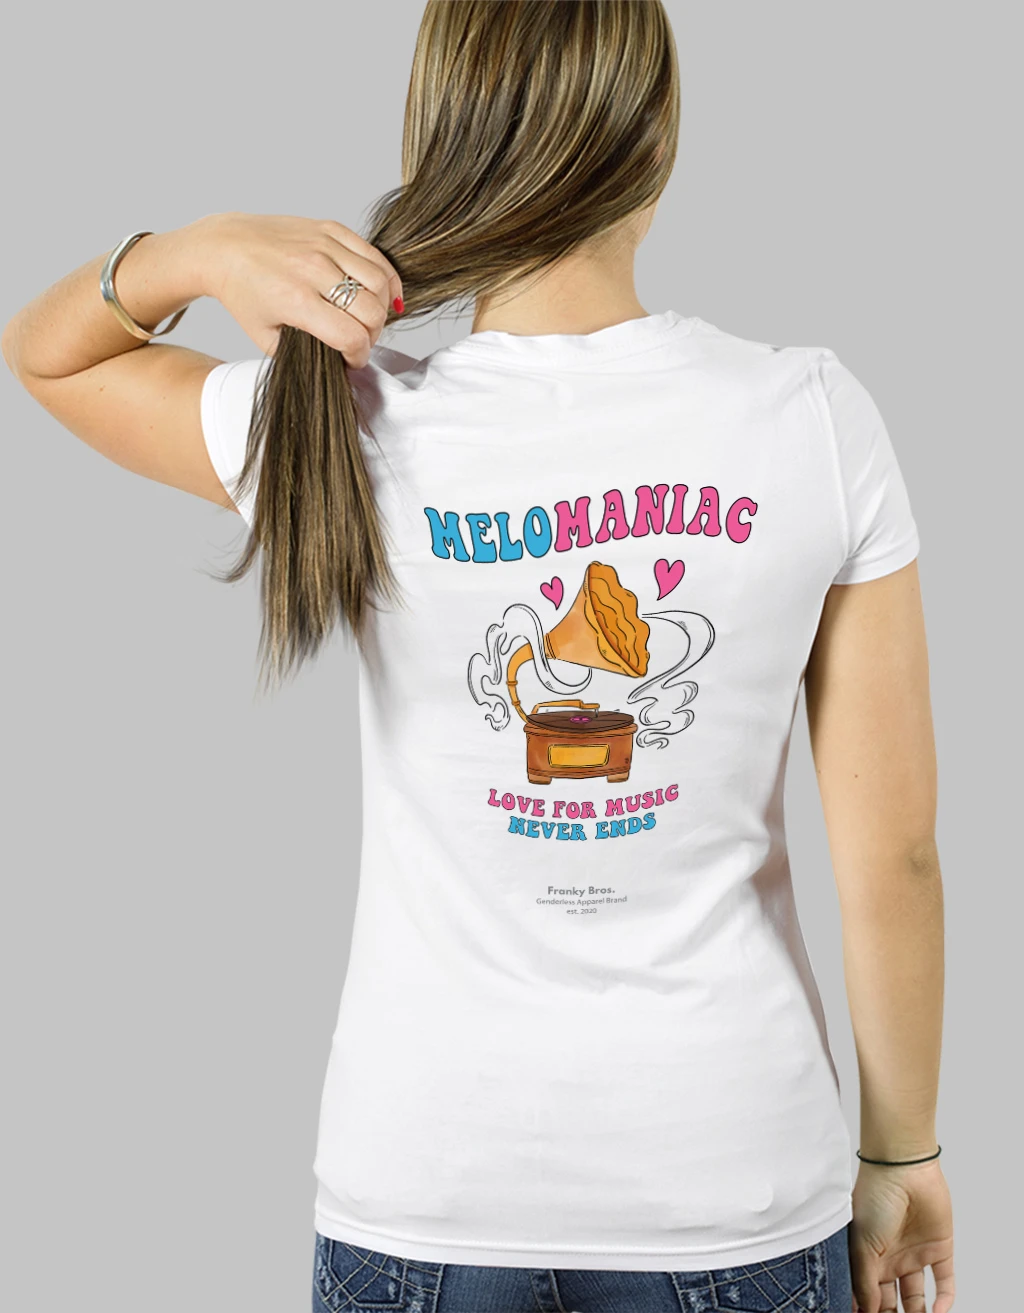 buy melomaniac white t-shirt for music artists lovers tee online in india under 500